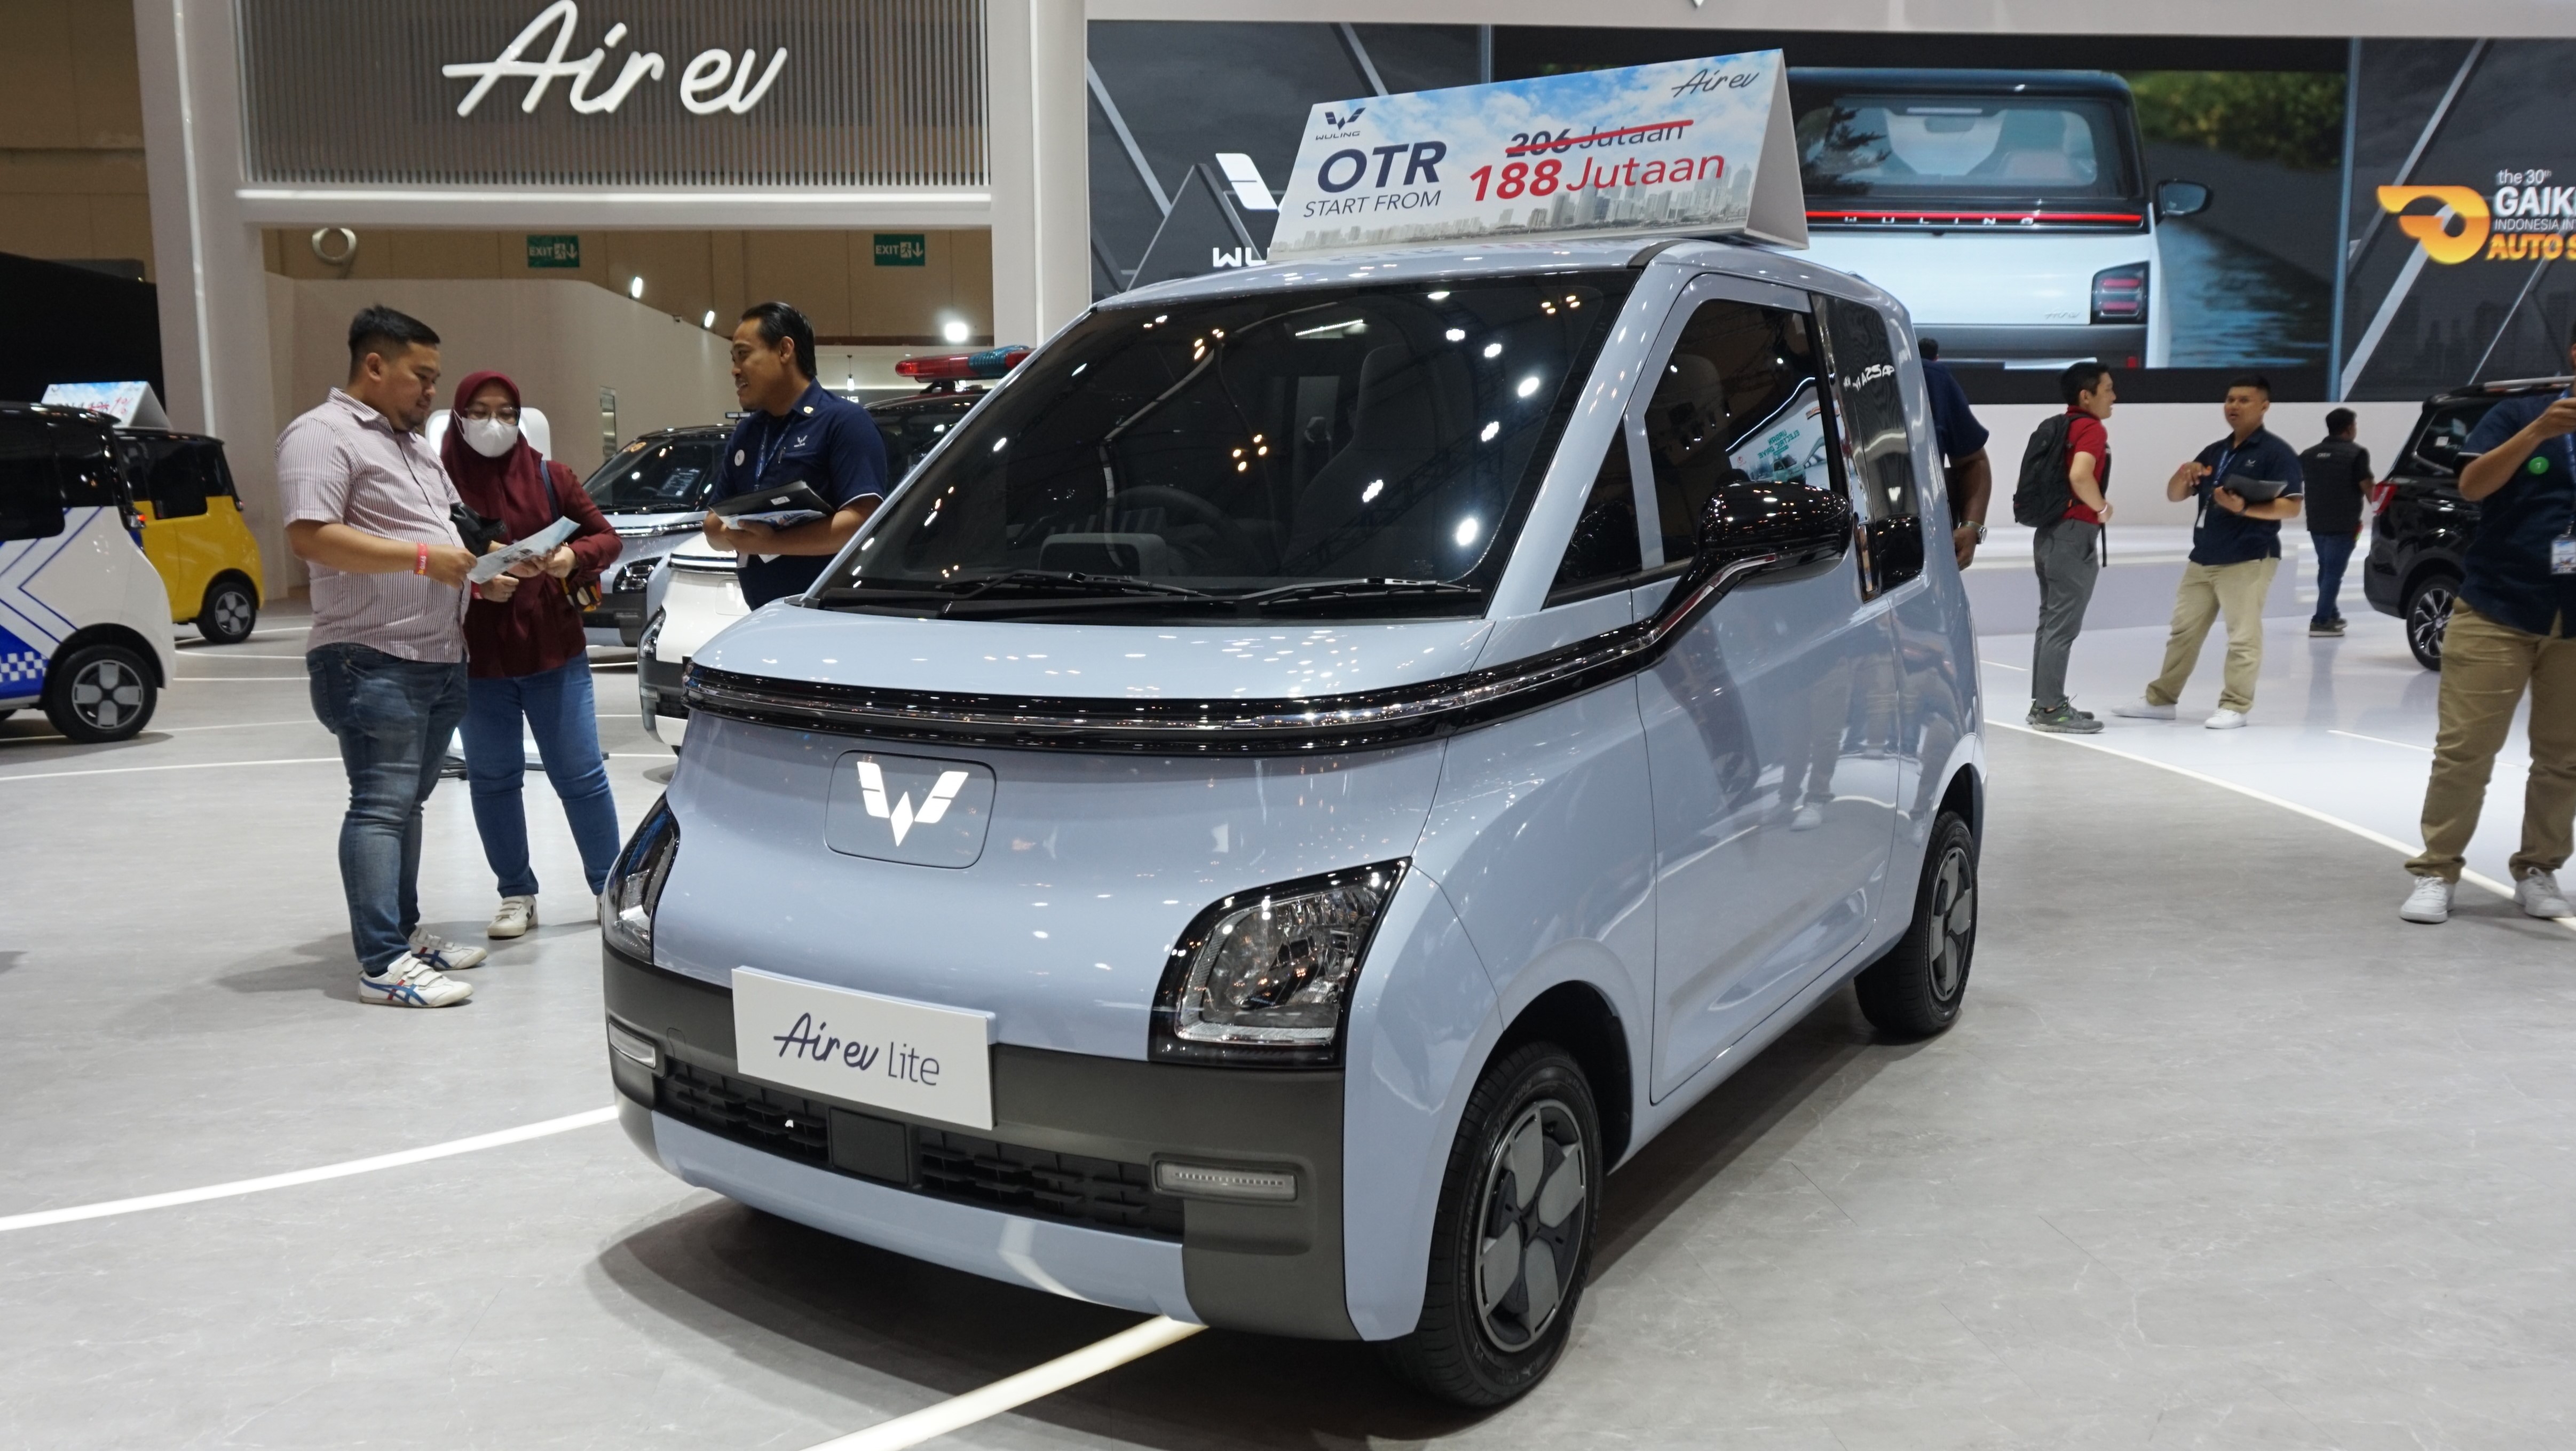 Image The Three Wuling Air ev Variants Support Sustainable Mobility With Various Conveniences